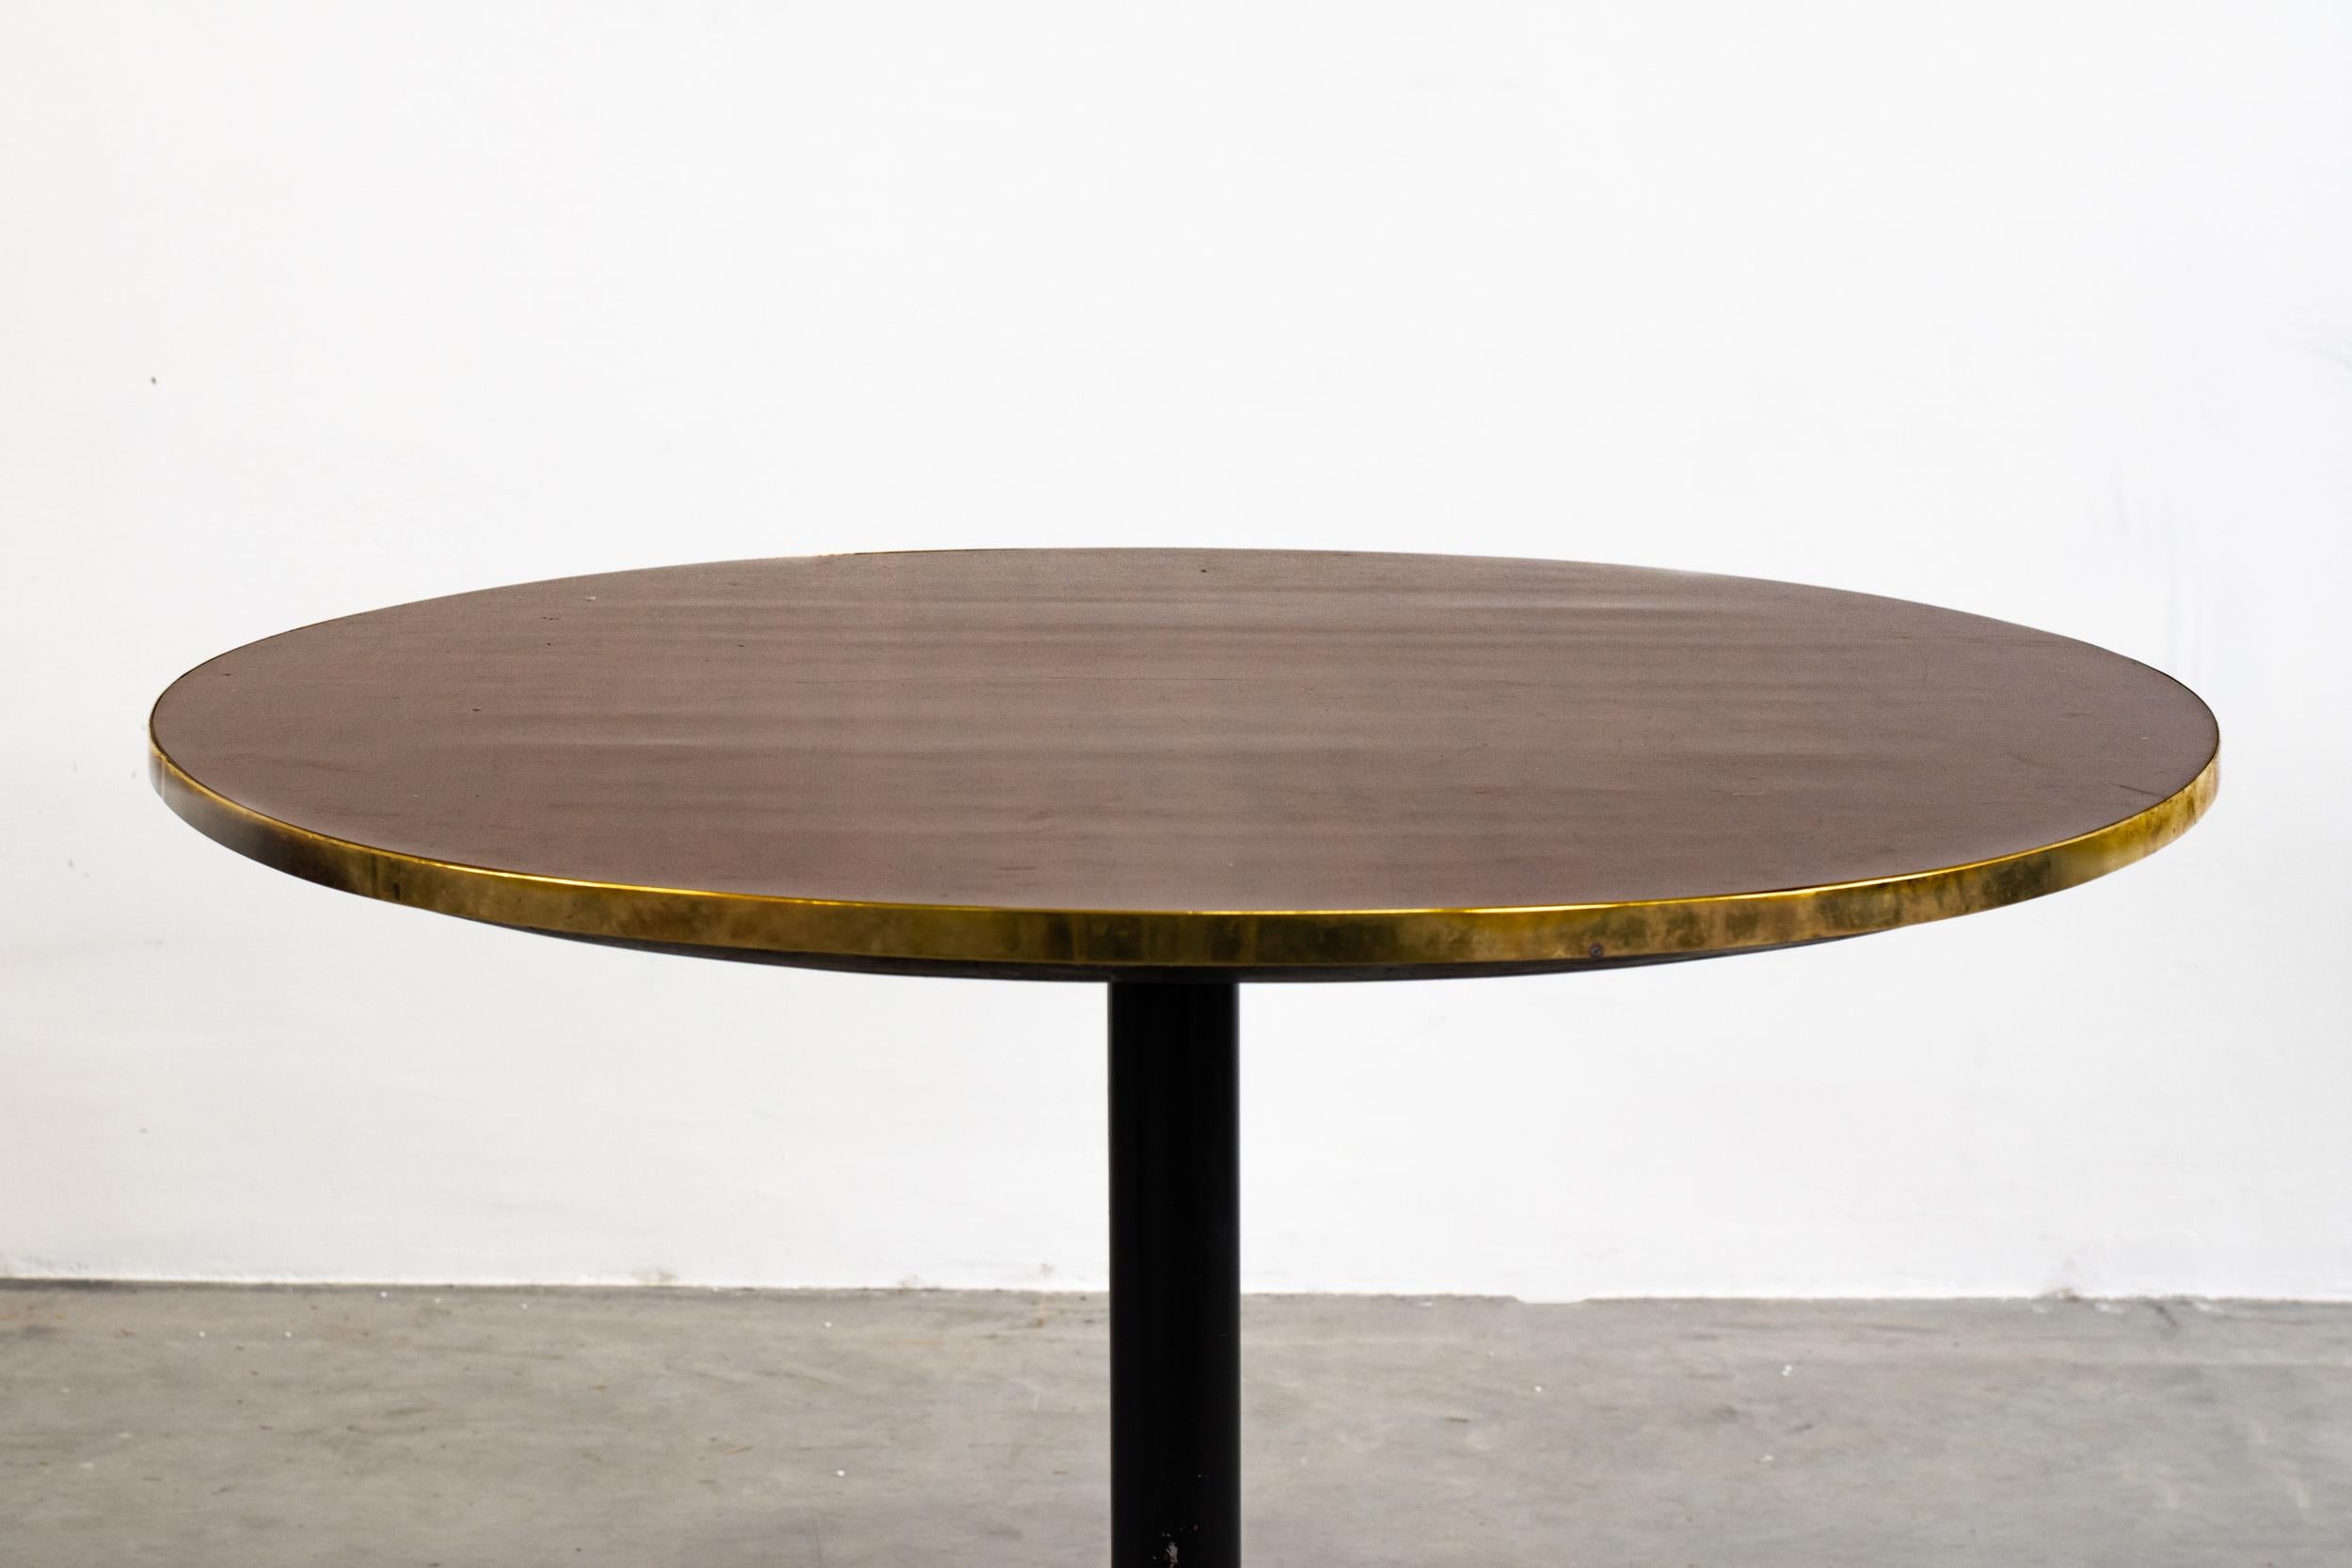 Late 20th Century Gio Ponti Oval Dining Table in Wood and Brass Rima, 1950s, Italy